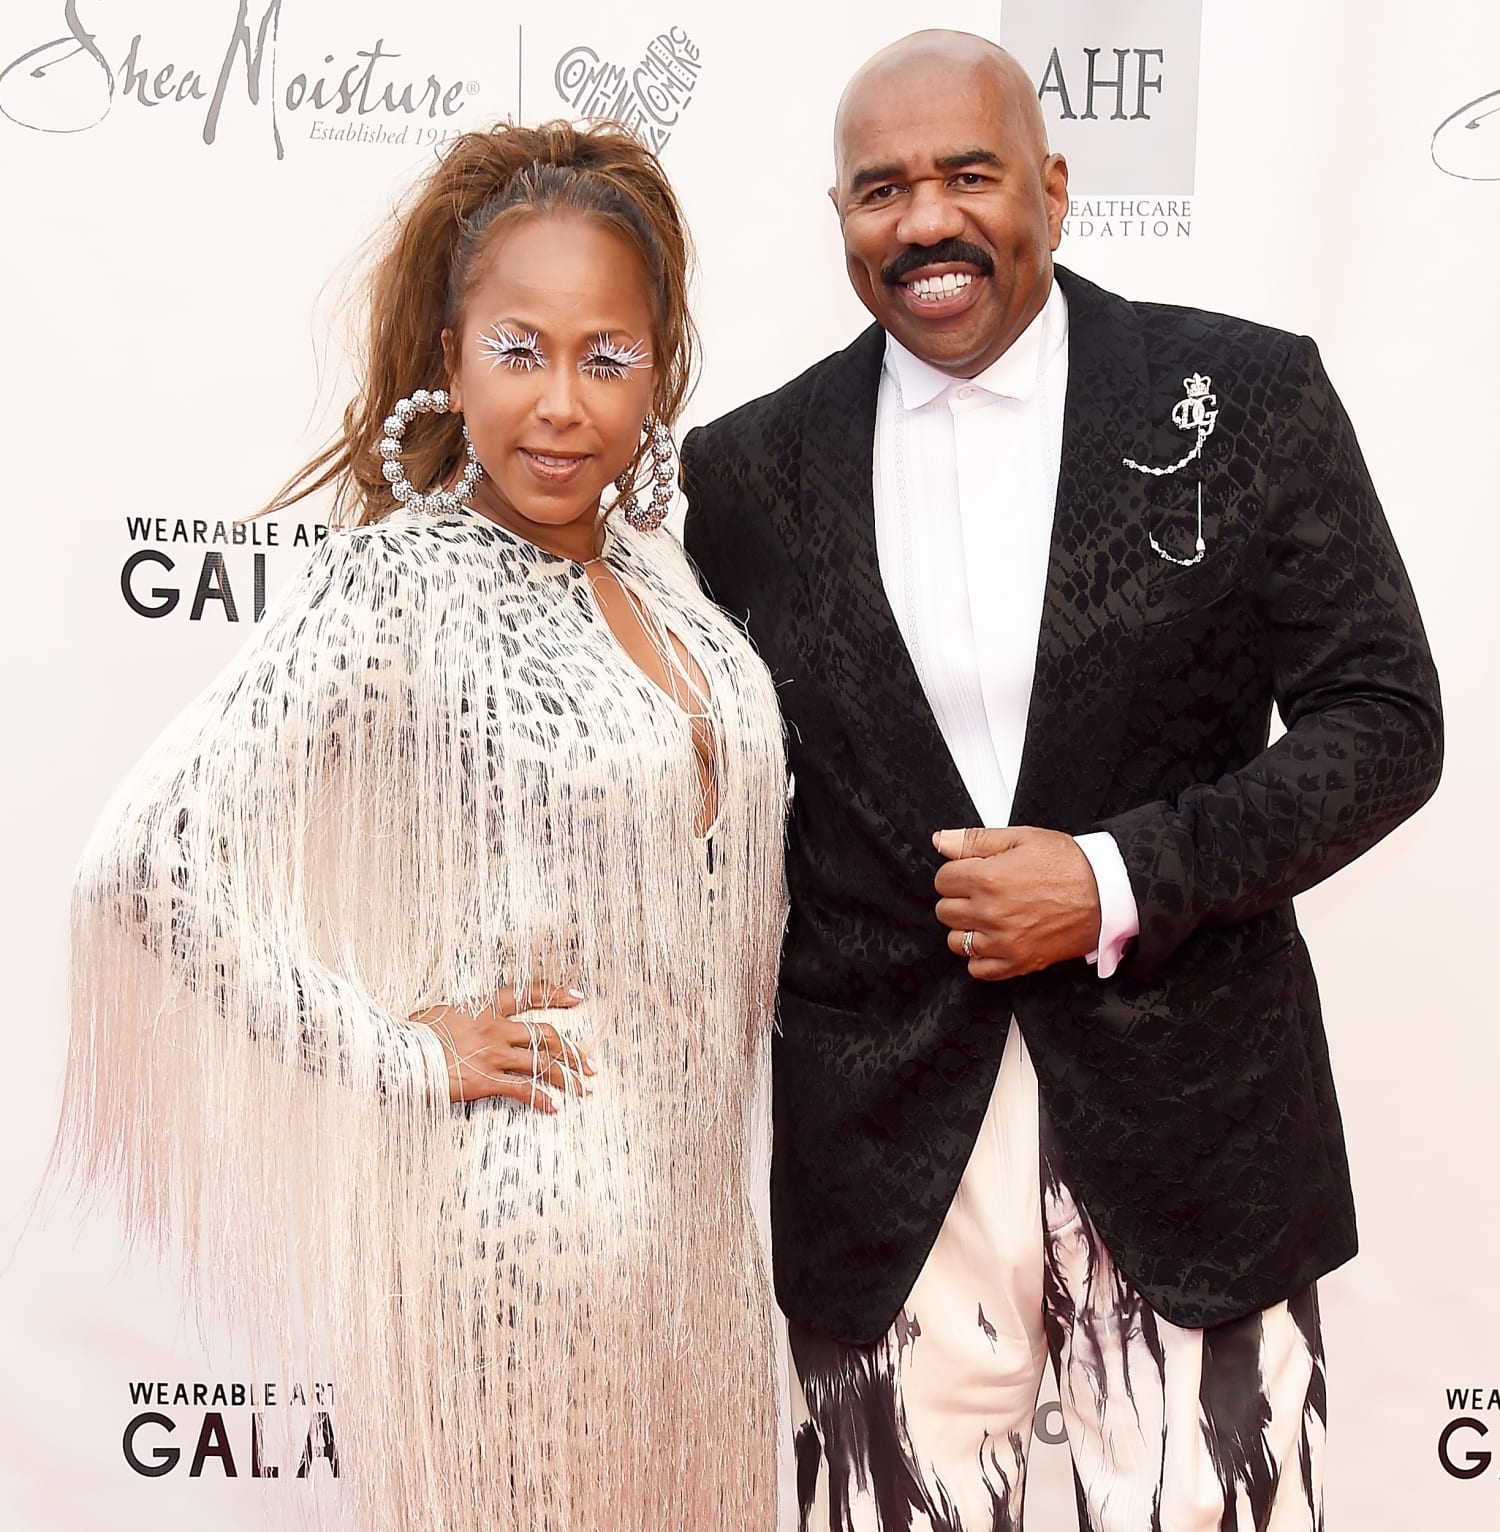 Relationships: New Study May Make Steve Harvey's Wife Uncomfortable